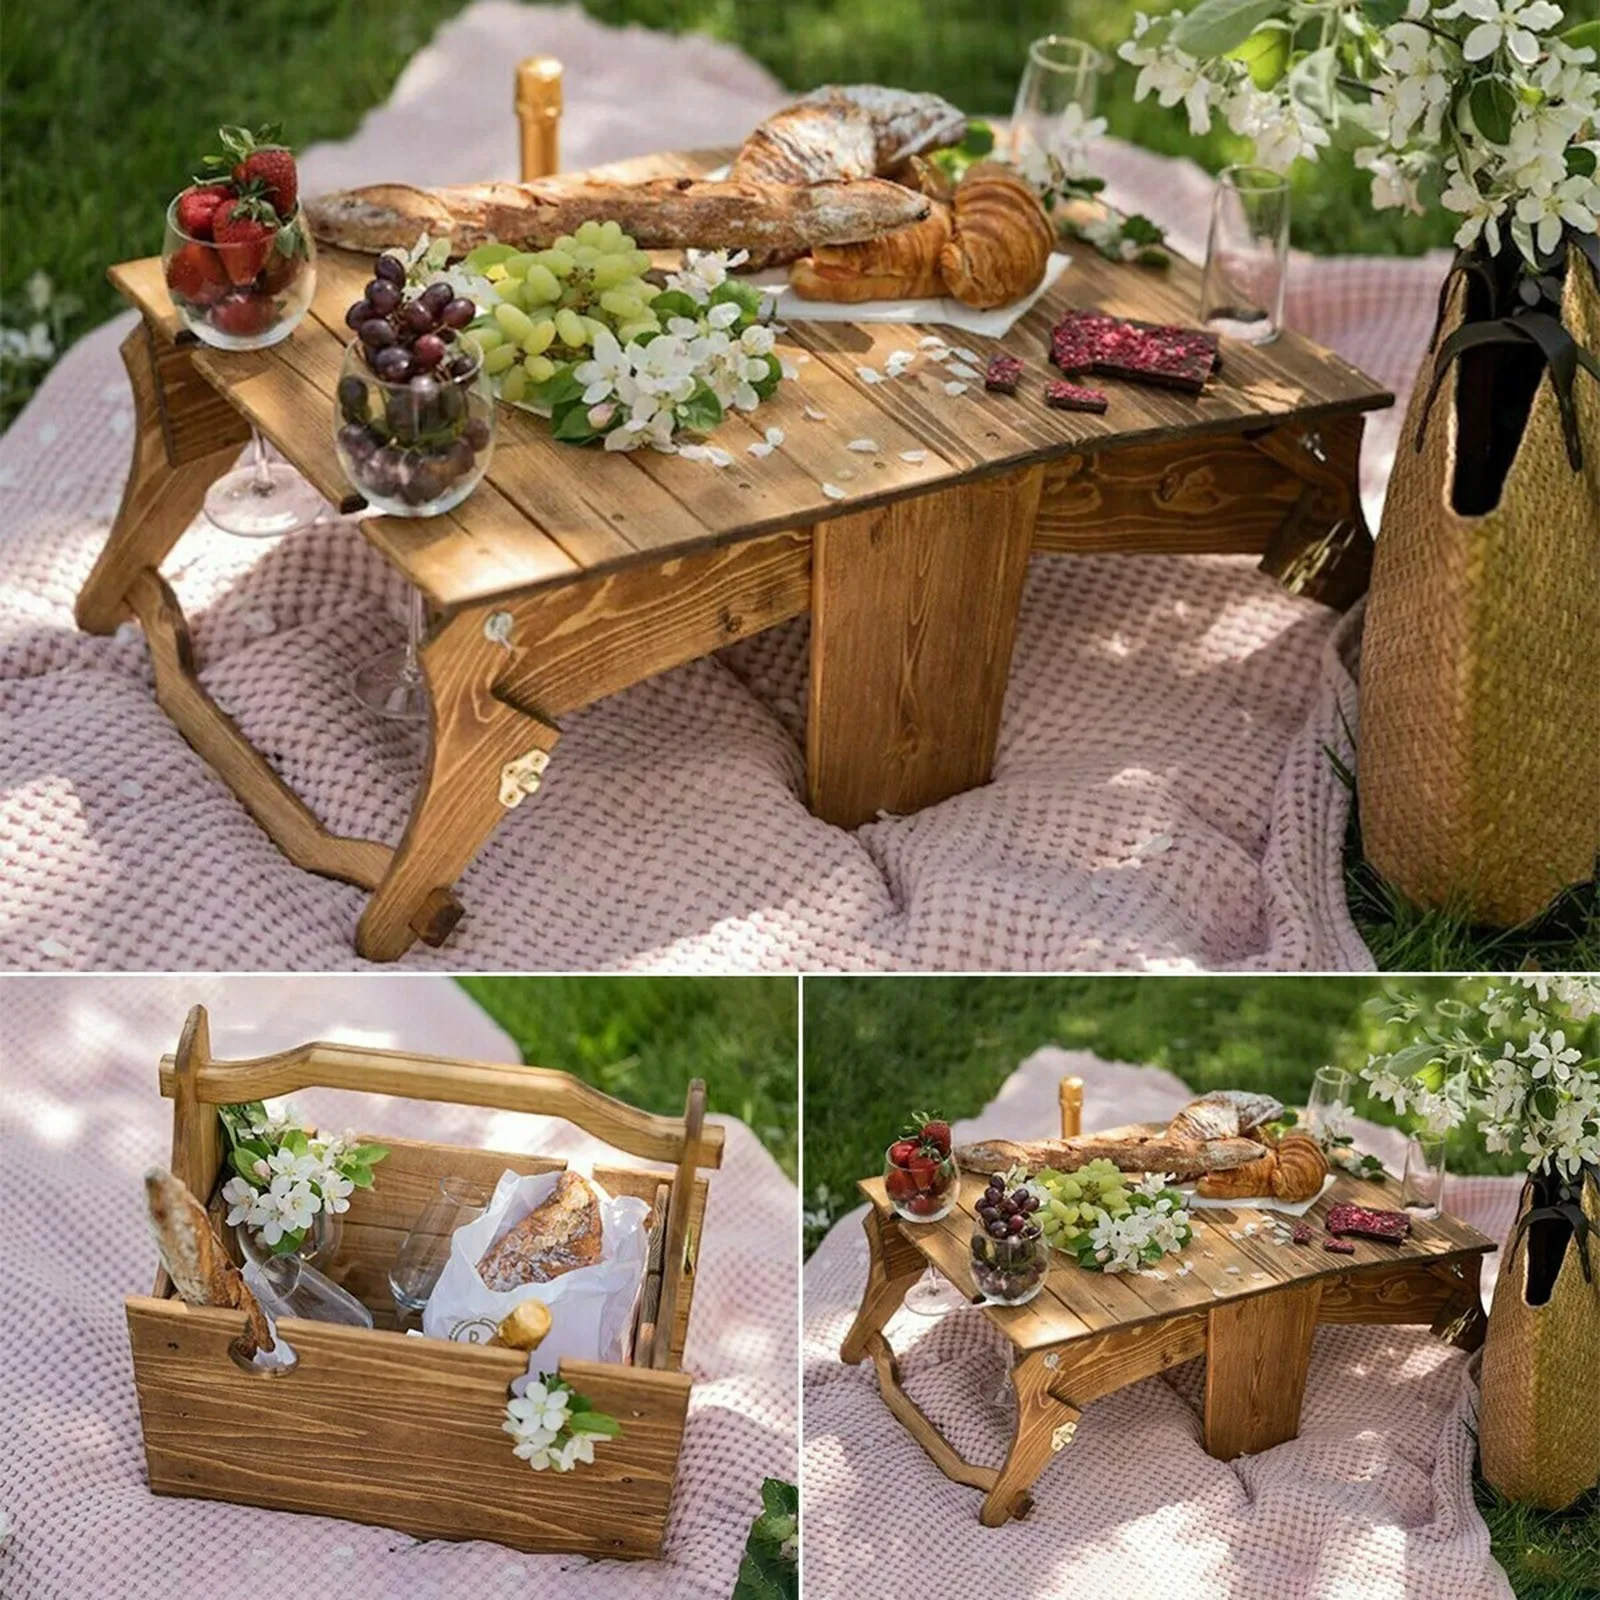 Folding Basket Table Foldable Portable 2 In 1 Basket Outdoor Wine And Snack Table For Family over Sink Dish Drainer Shelf